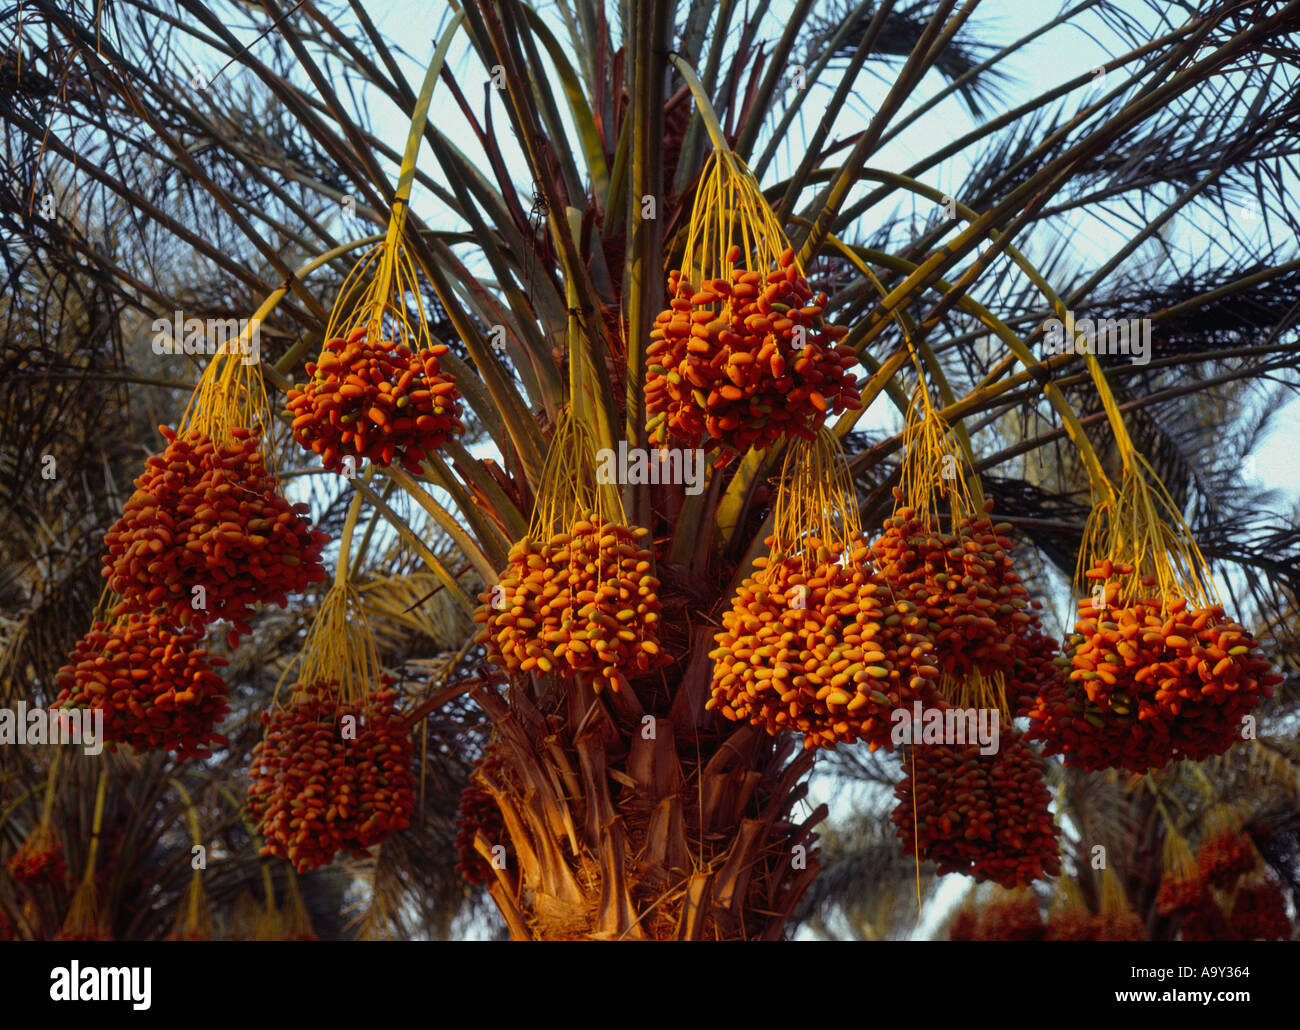 Israel Dead Sea area kibutz Almog bunches of ripe dates still on their palm tree Stock Photo